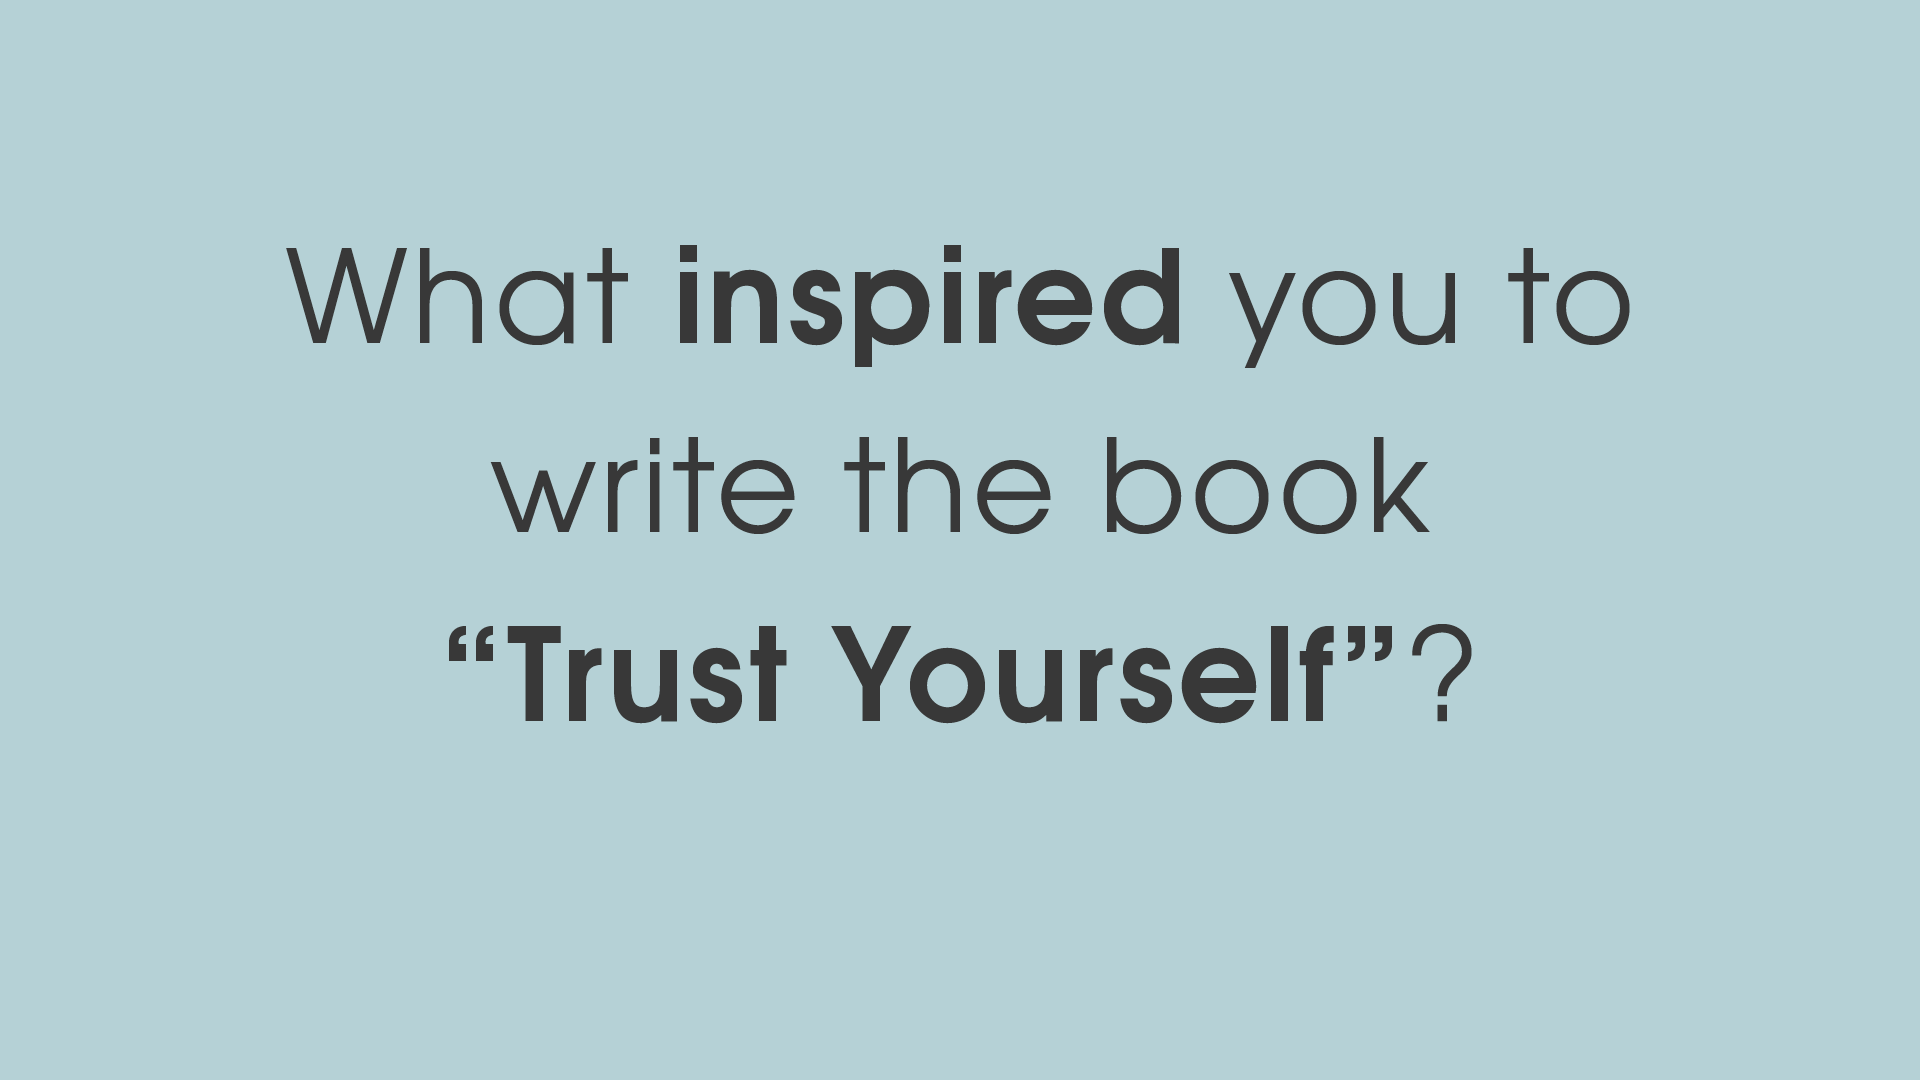 What inspired you to write the book Trust Yourself?